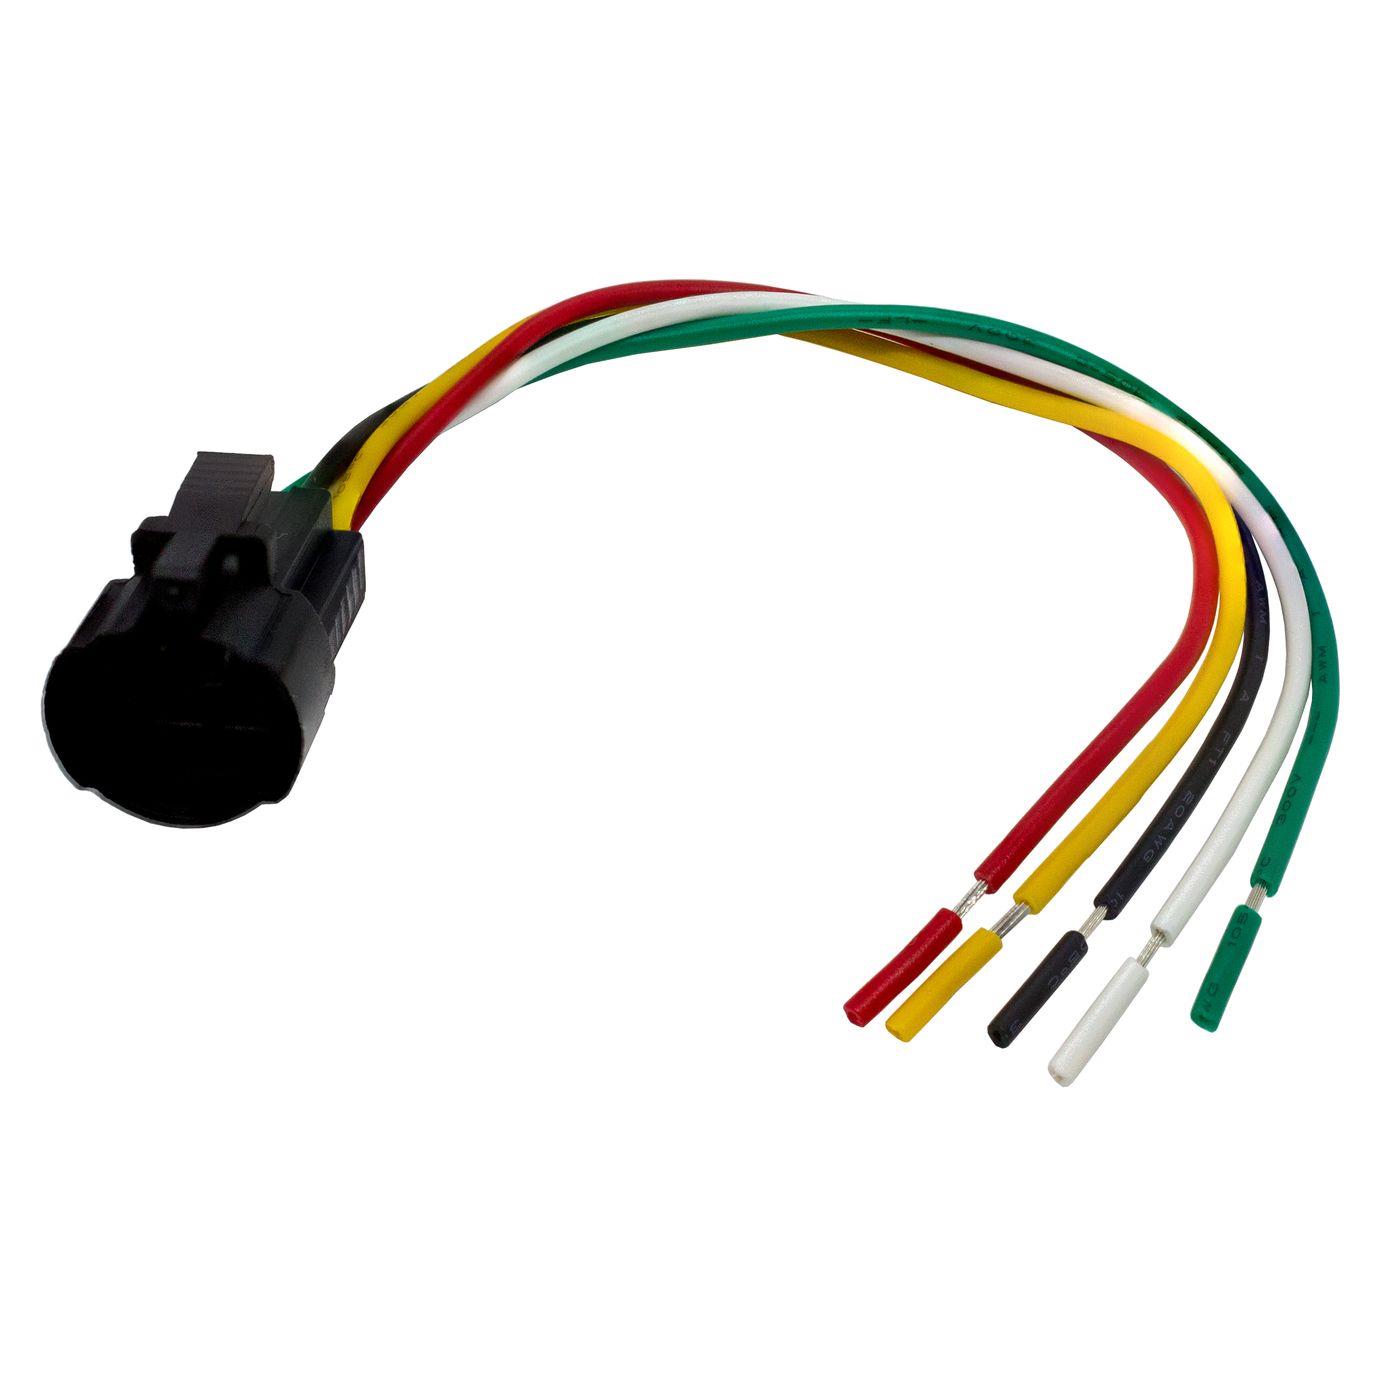 Connectors for 16mm Push button Switch 5x 0,5mm² Cable length: 140mm